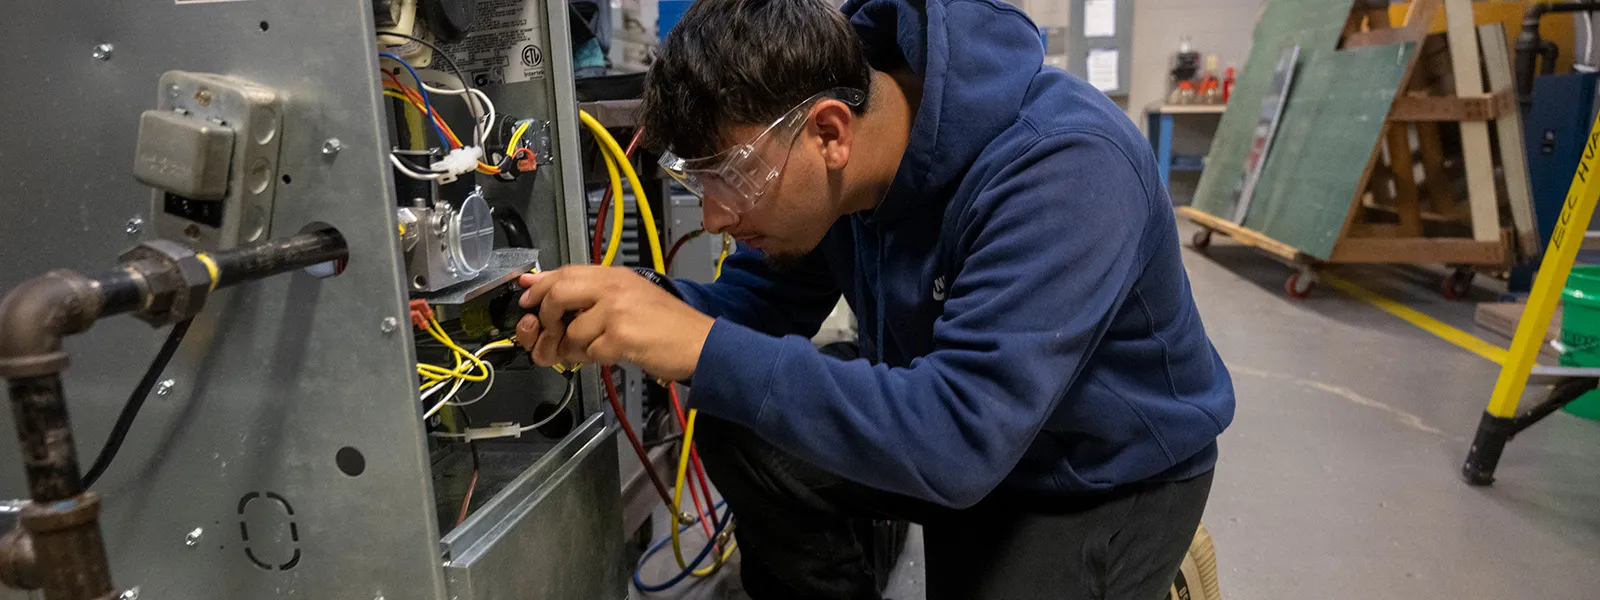 student working on wiring